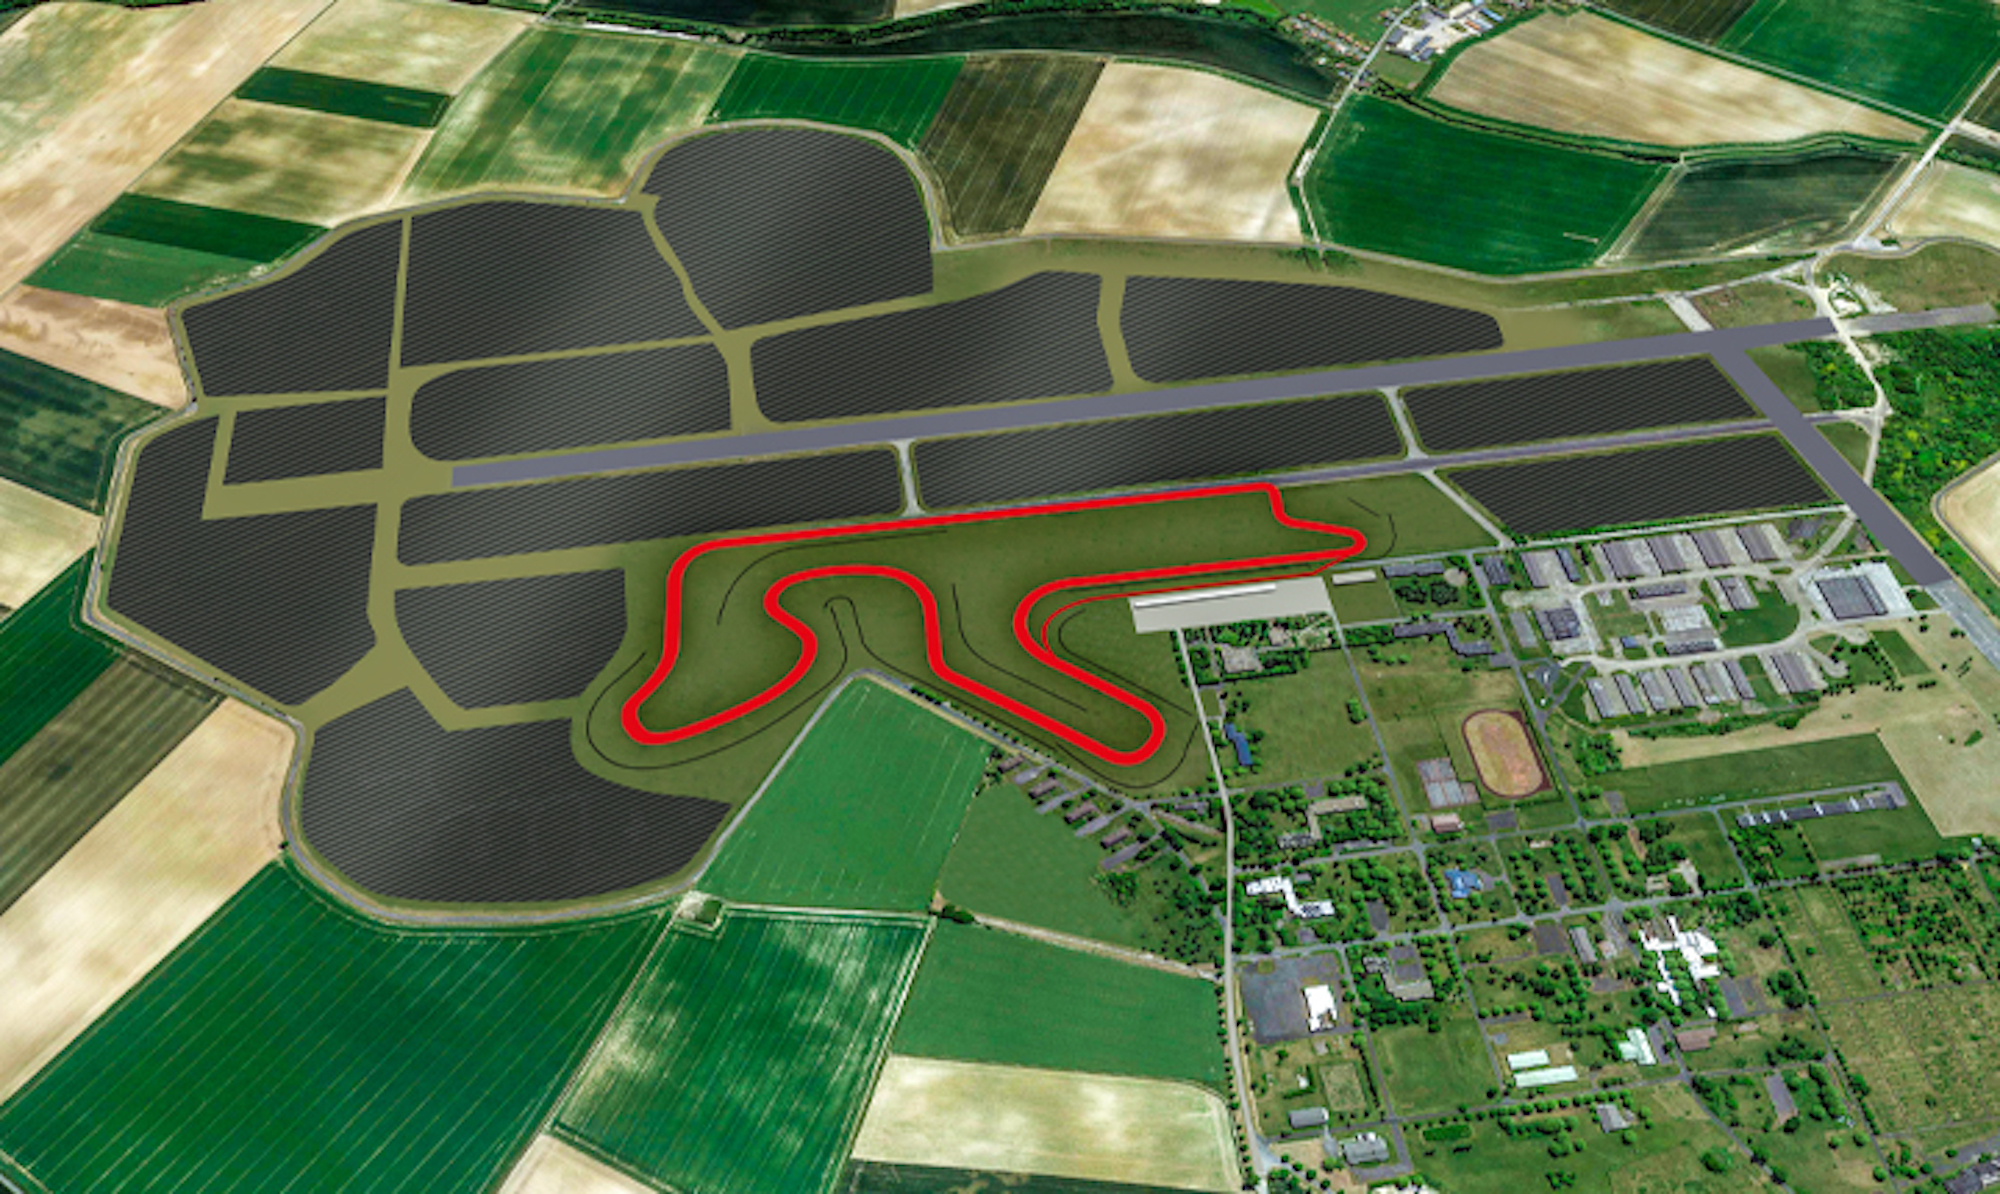 A view of the new eco race track designed and built in Couvron by MotorSport Vision (MSV). Media sourced from Endurance Info.